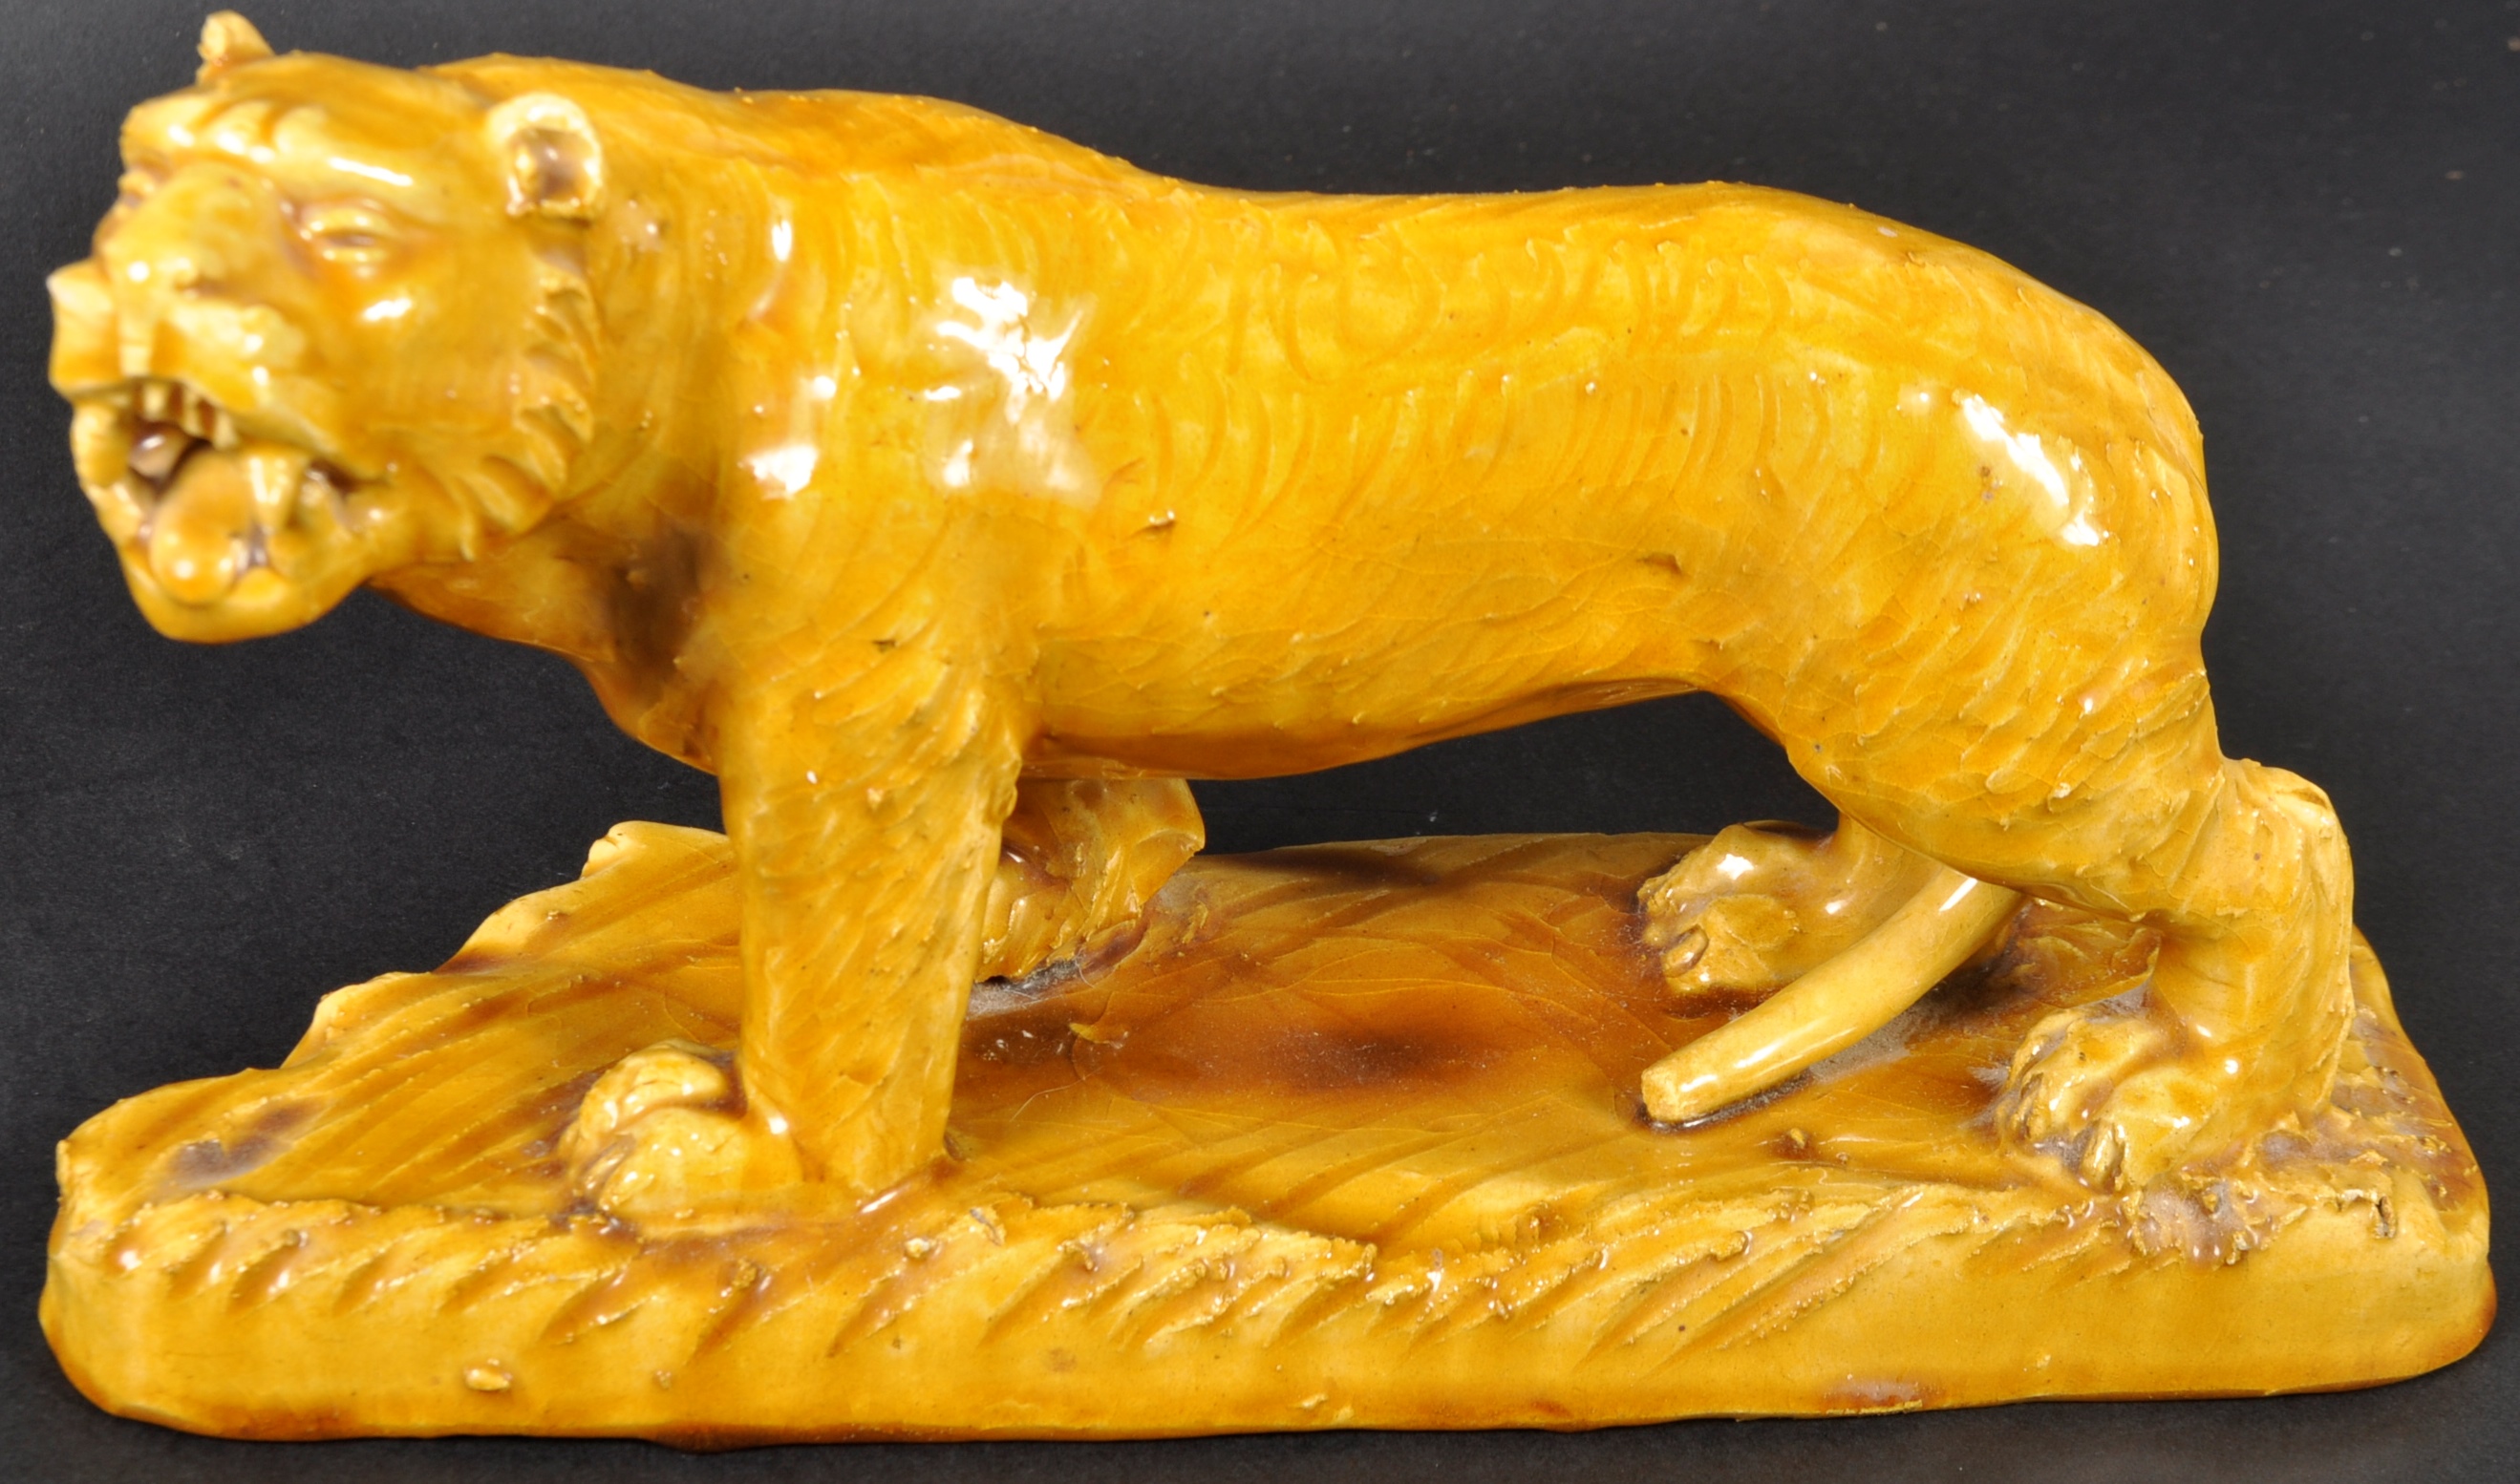 PAIR OF 19TH CENTURY VICTORIAN GLAZED CERAMIC PROWLING TIGERS - Image 7 of 9